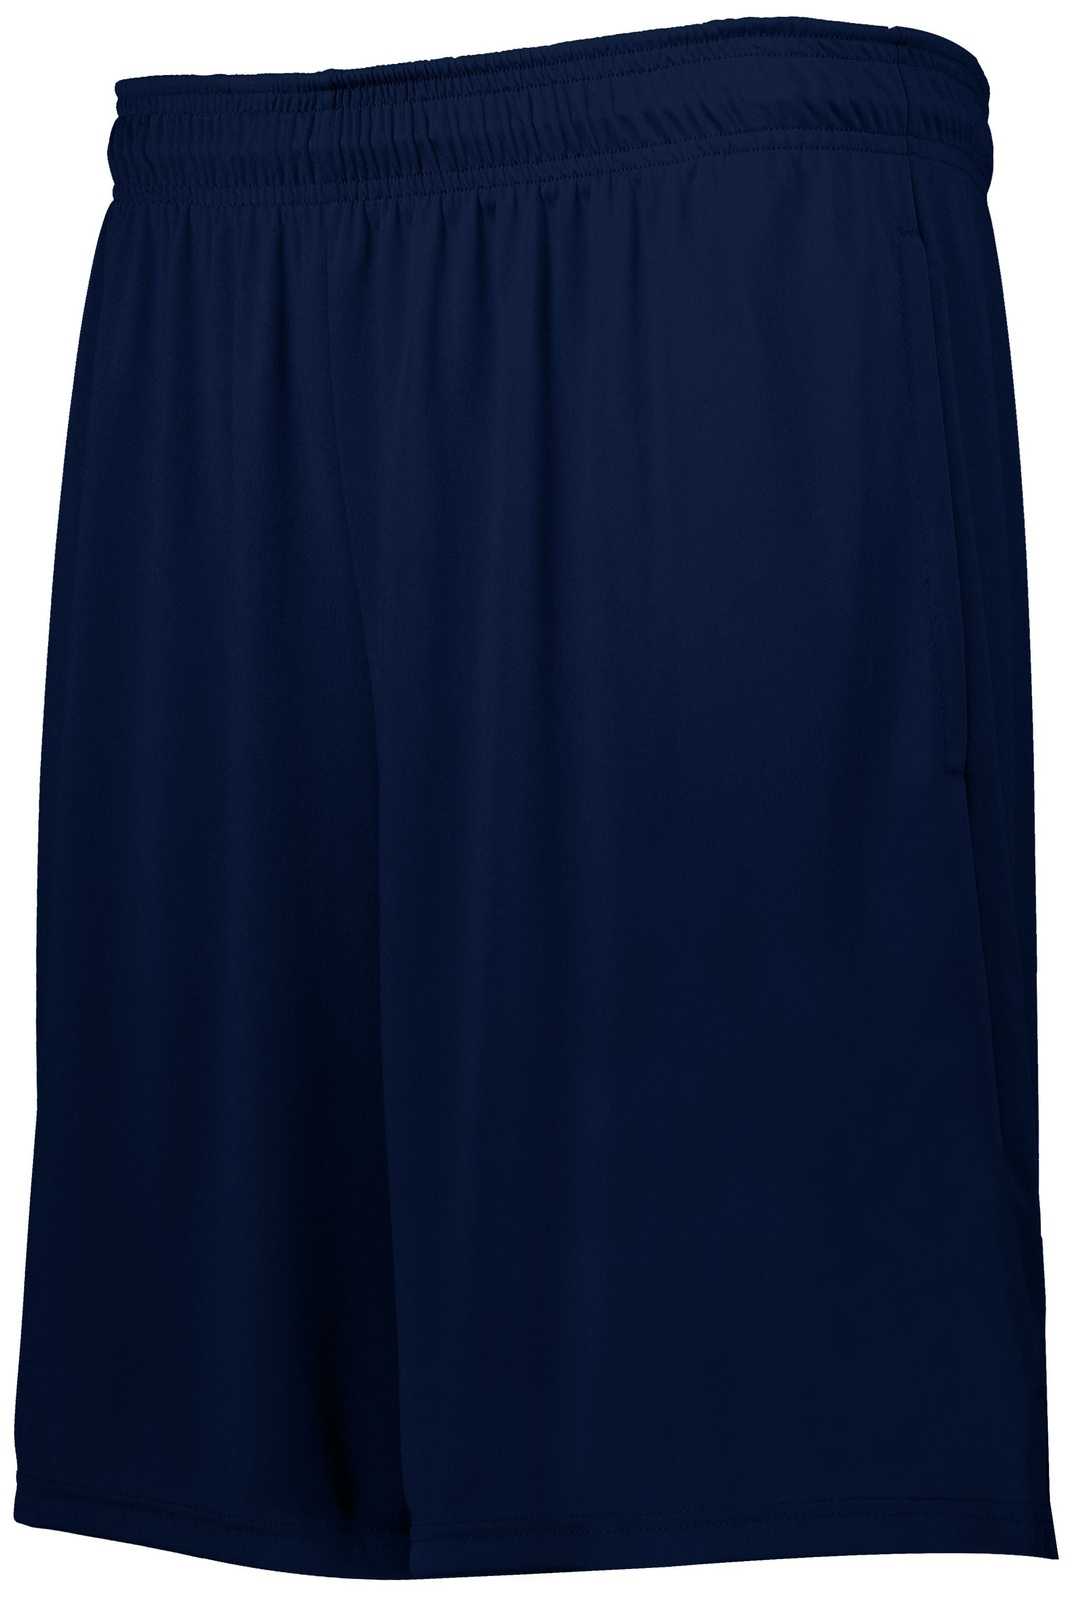 Holloway 229611 Youth Whisk 2.0 Shorts - Navy - HIT a Double